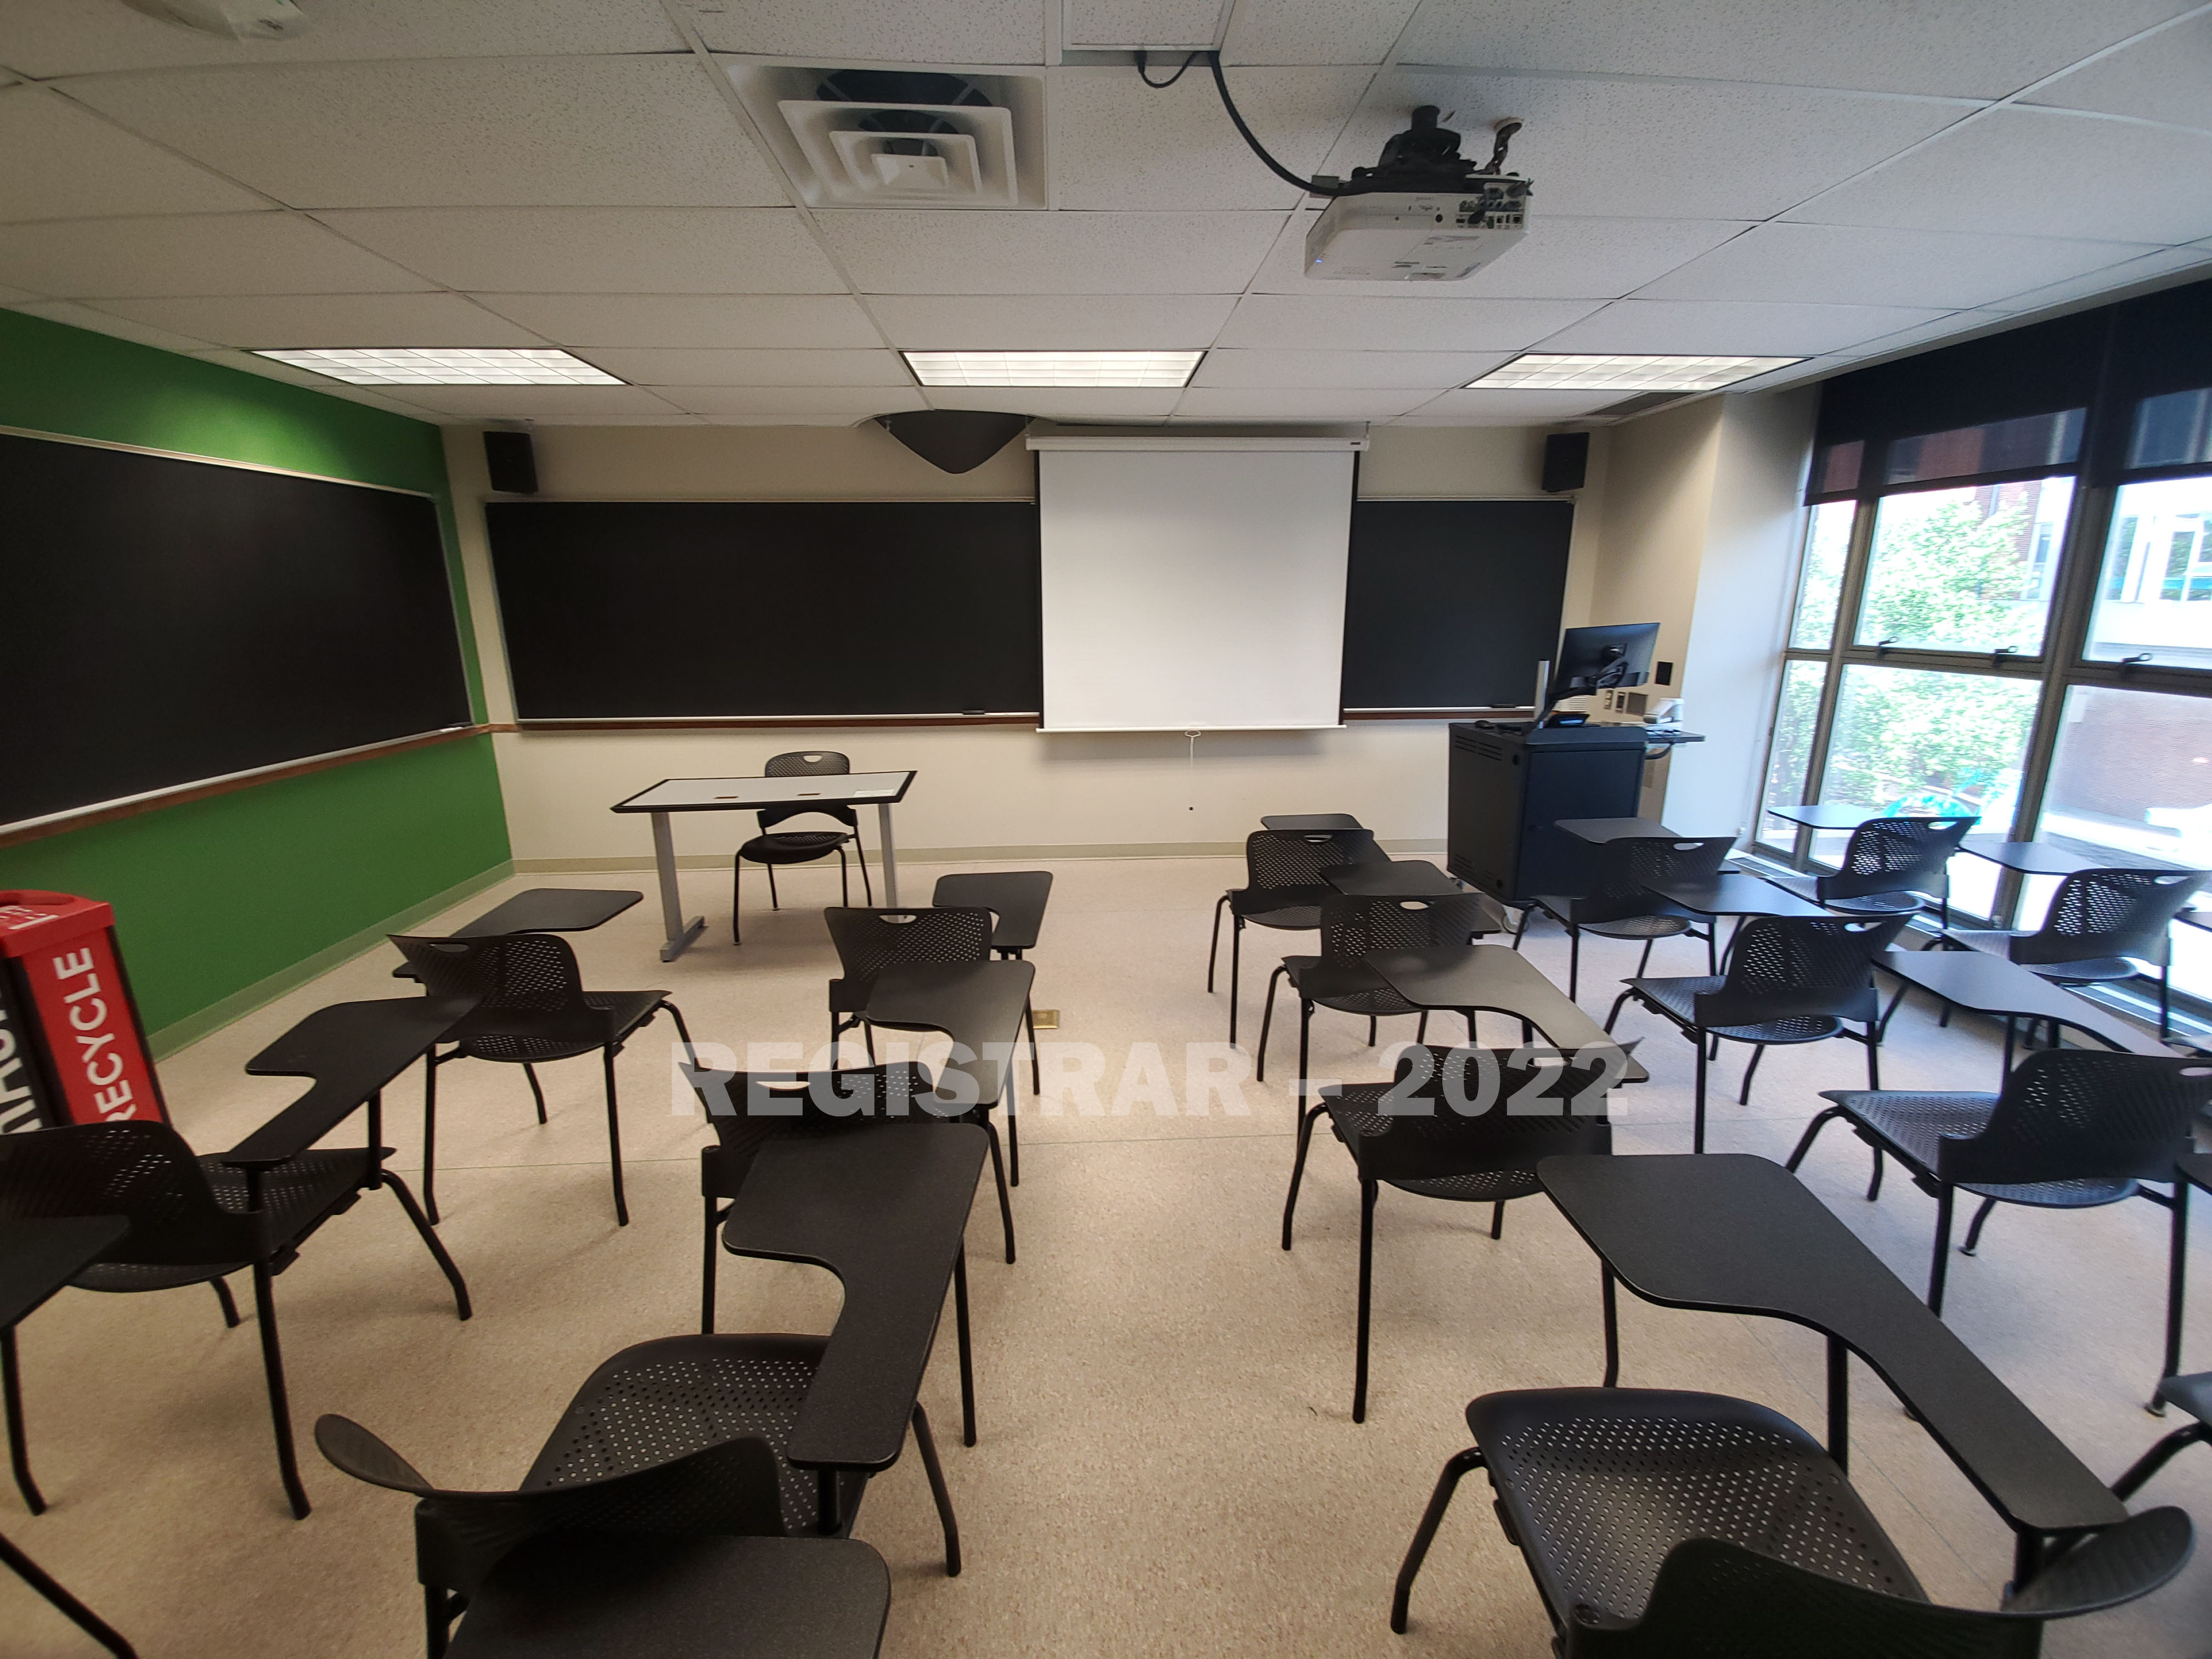 Enarson Classroom Building room 306 ultra wide angle view from the back of the room with projector screen down